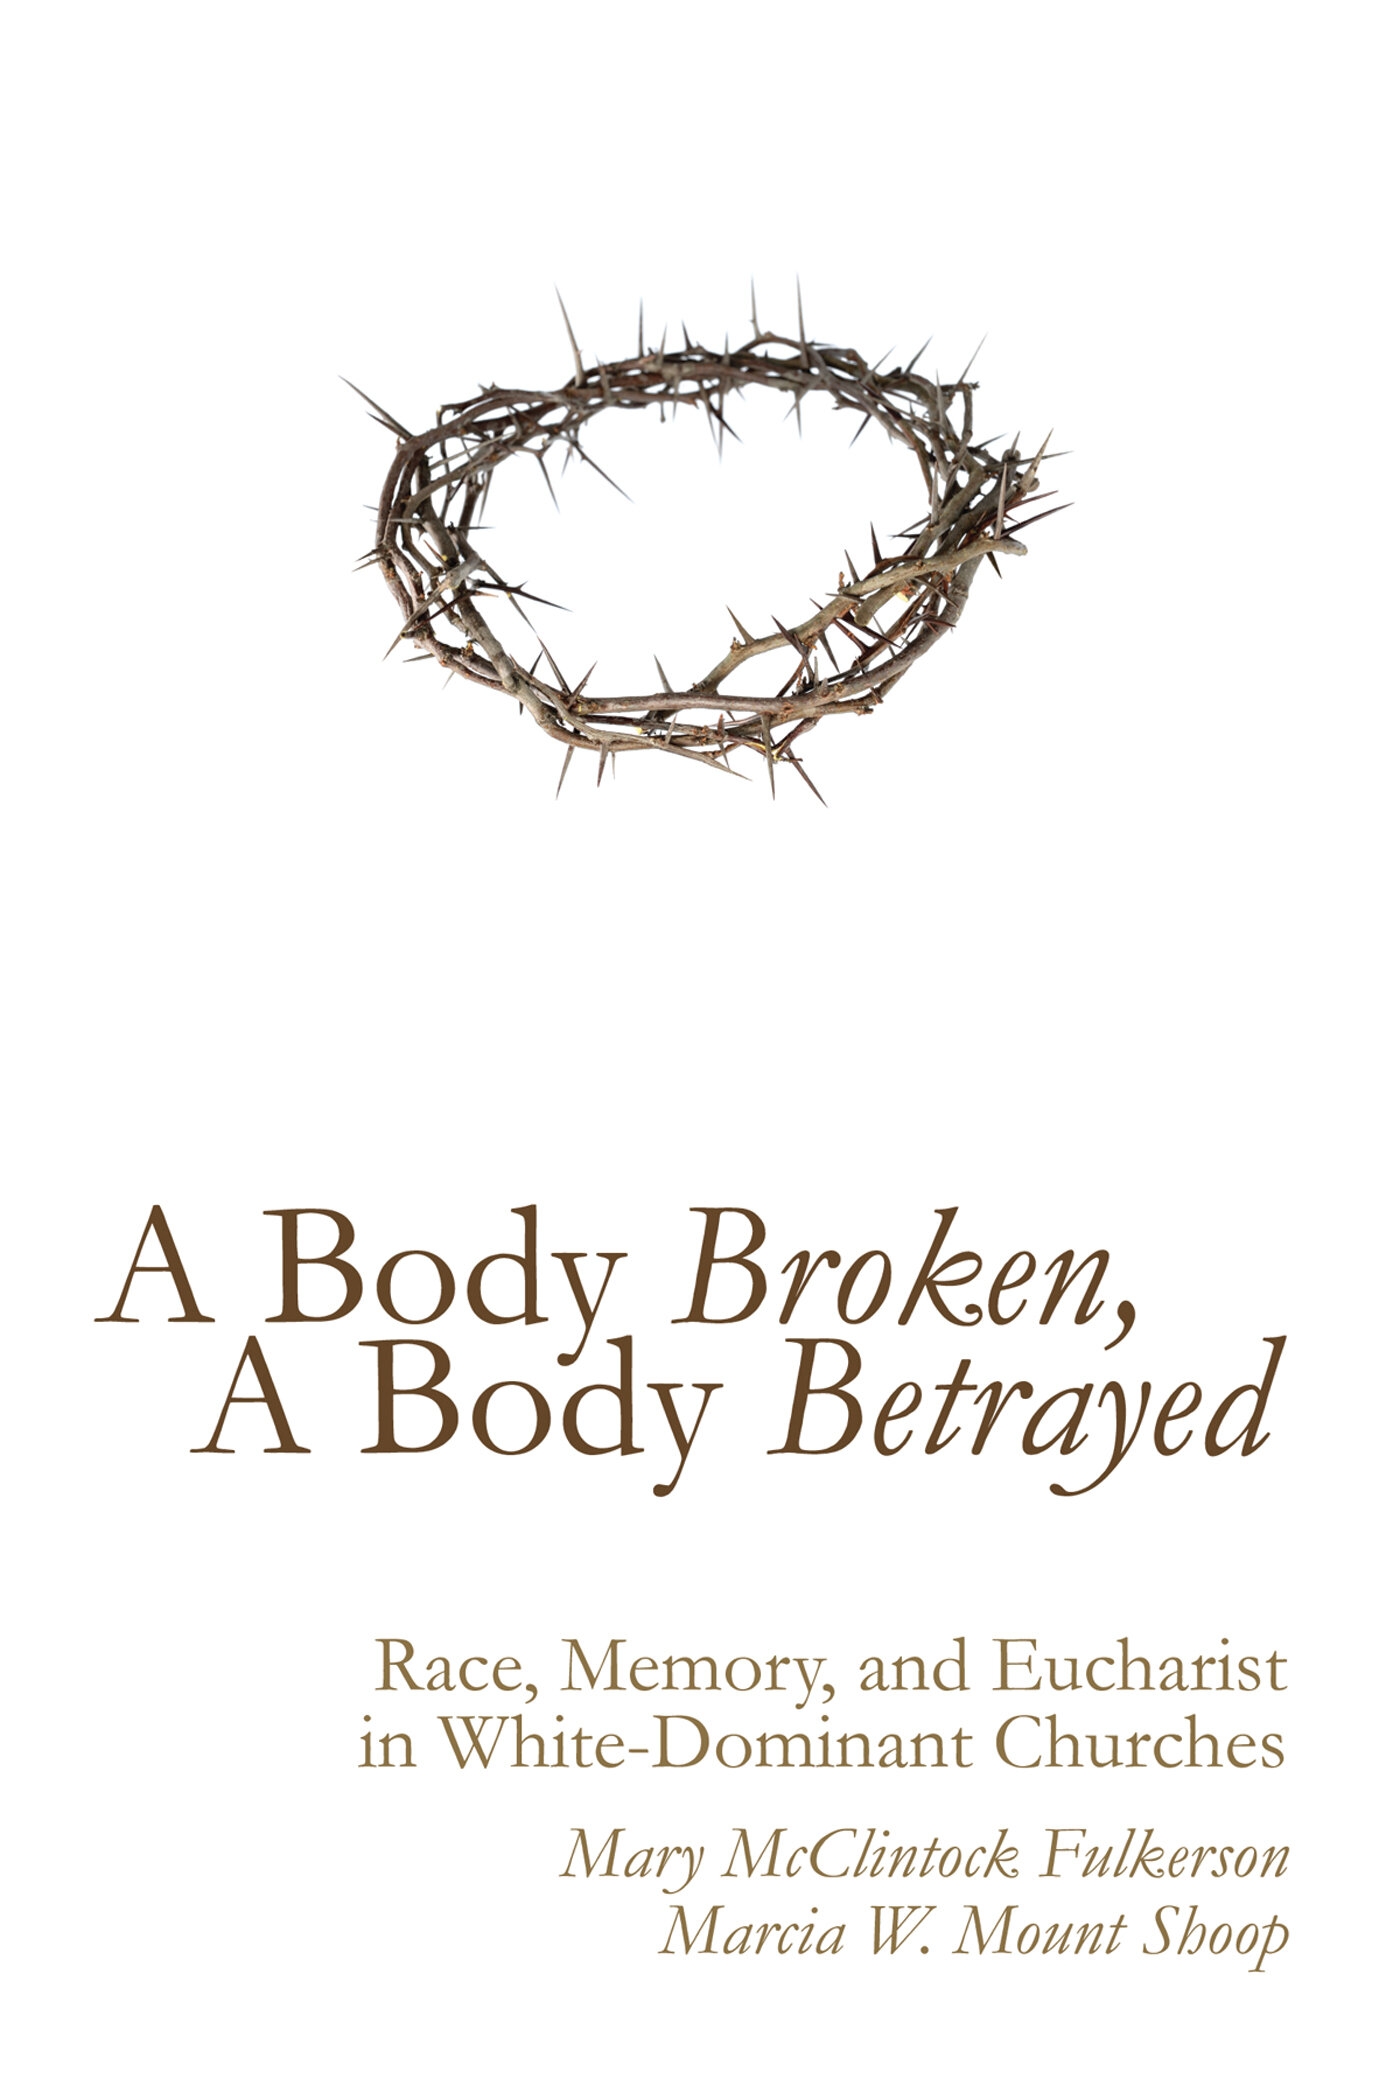 Betrayed:　Memory,　A　White-Dominant　Race,　A　Body　Body　Ebooks　Eucharist　Broken,　and　Faithlife　in　Churches